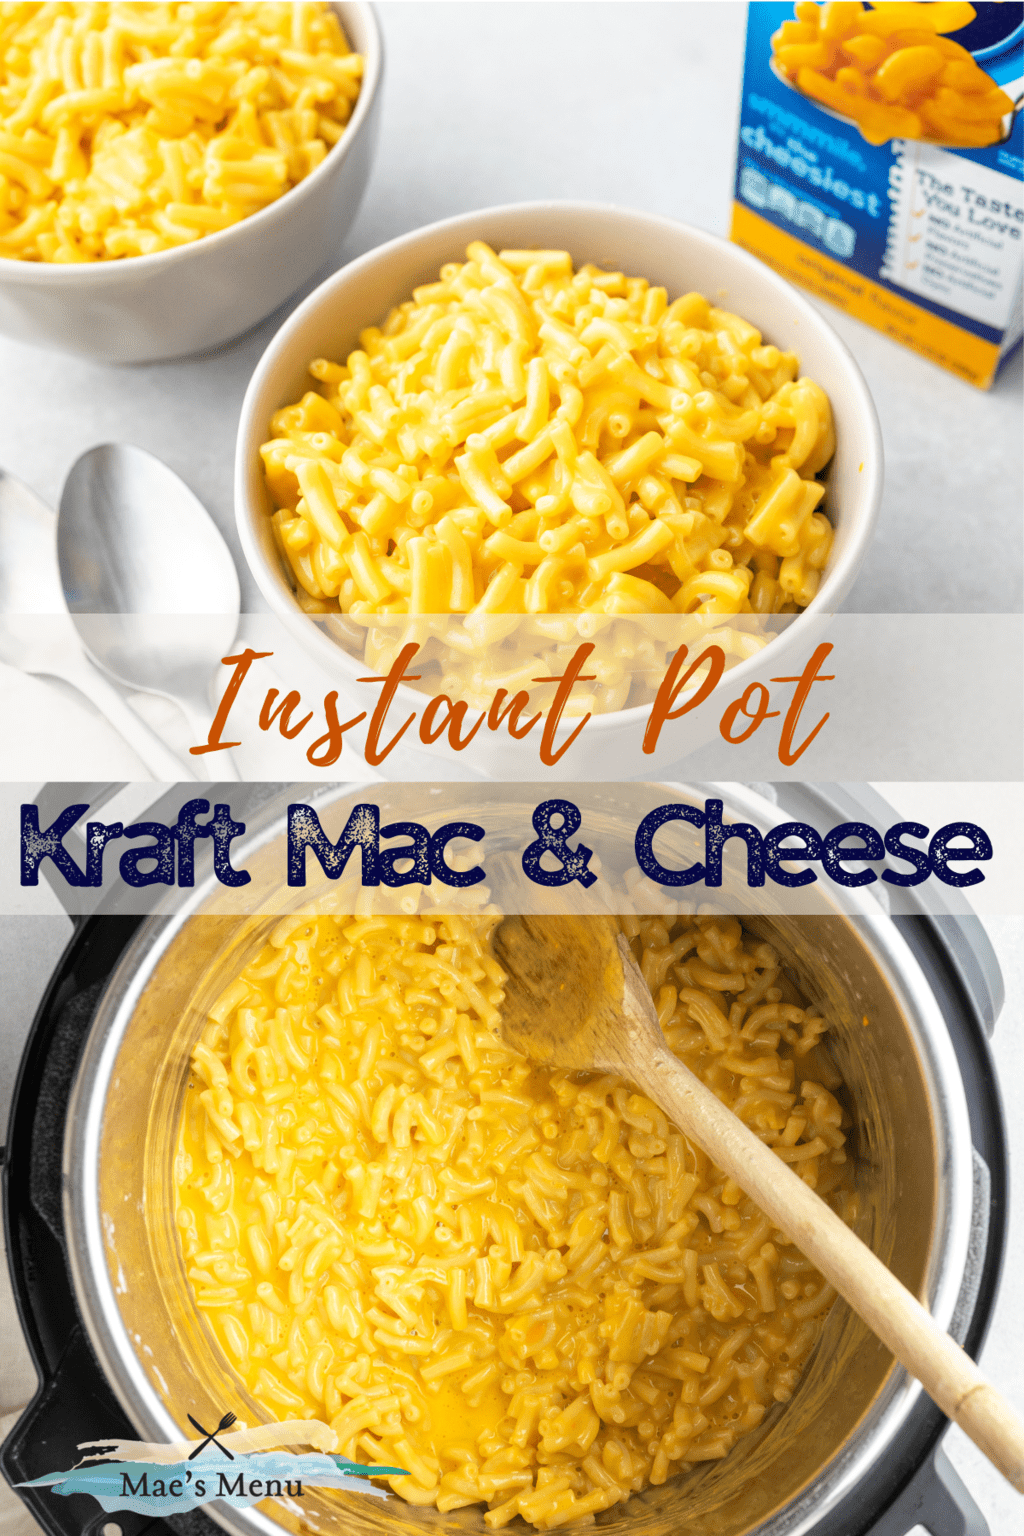 A pinterest pin for Kraft mac and cheese with a photo of the macaroni in the top and the overhead of the instant pot on the bottom.